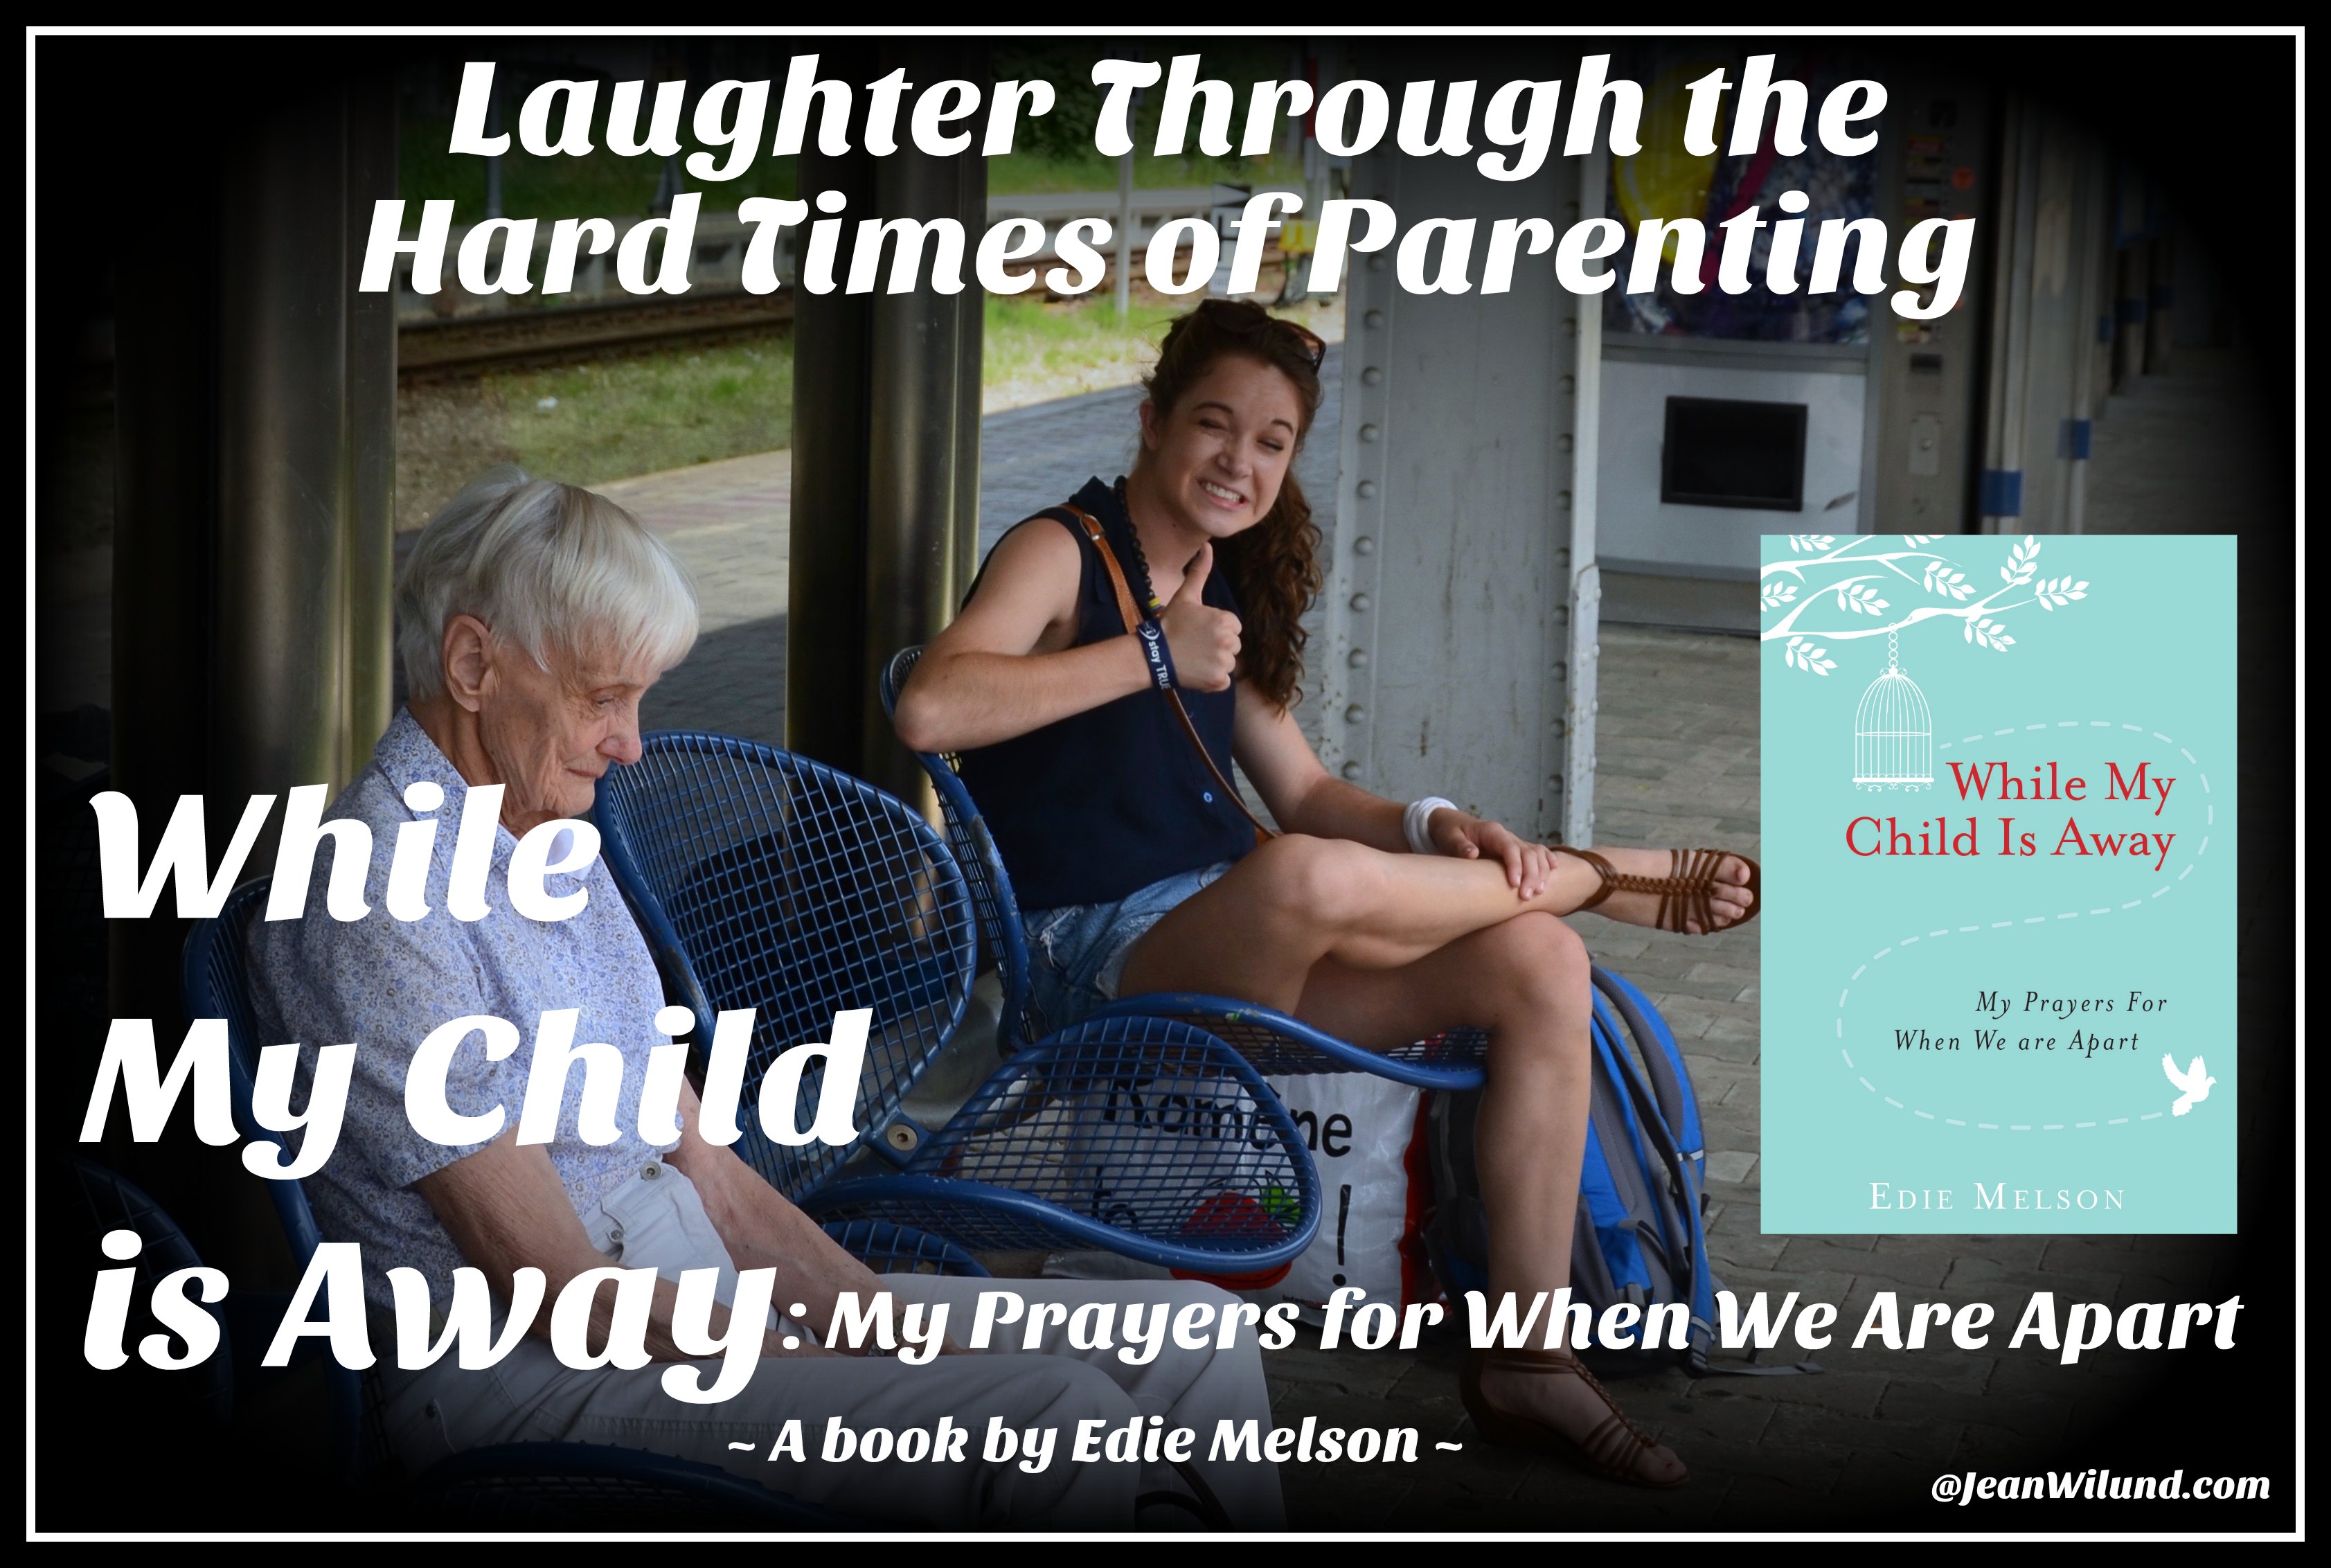 Laughter Through the Hard Times of Parenting. Learn how best to pray while your child is away in While My Child is Away (a book by Edie Melson) Interview by Jean Wilund